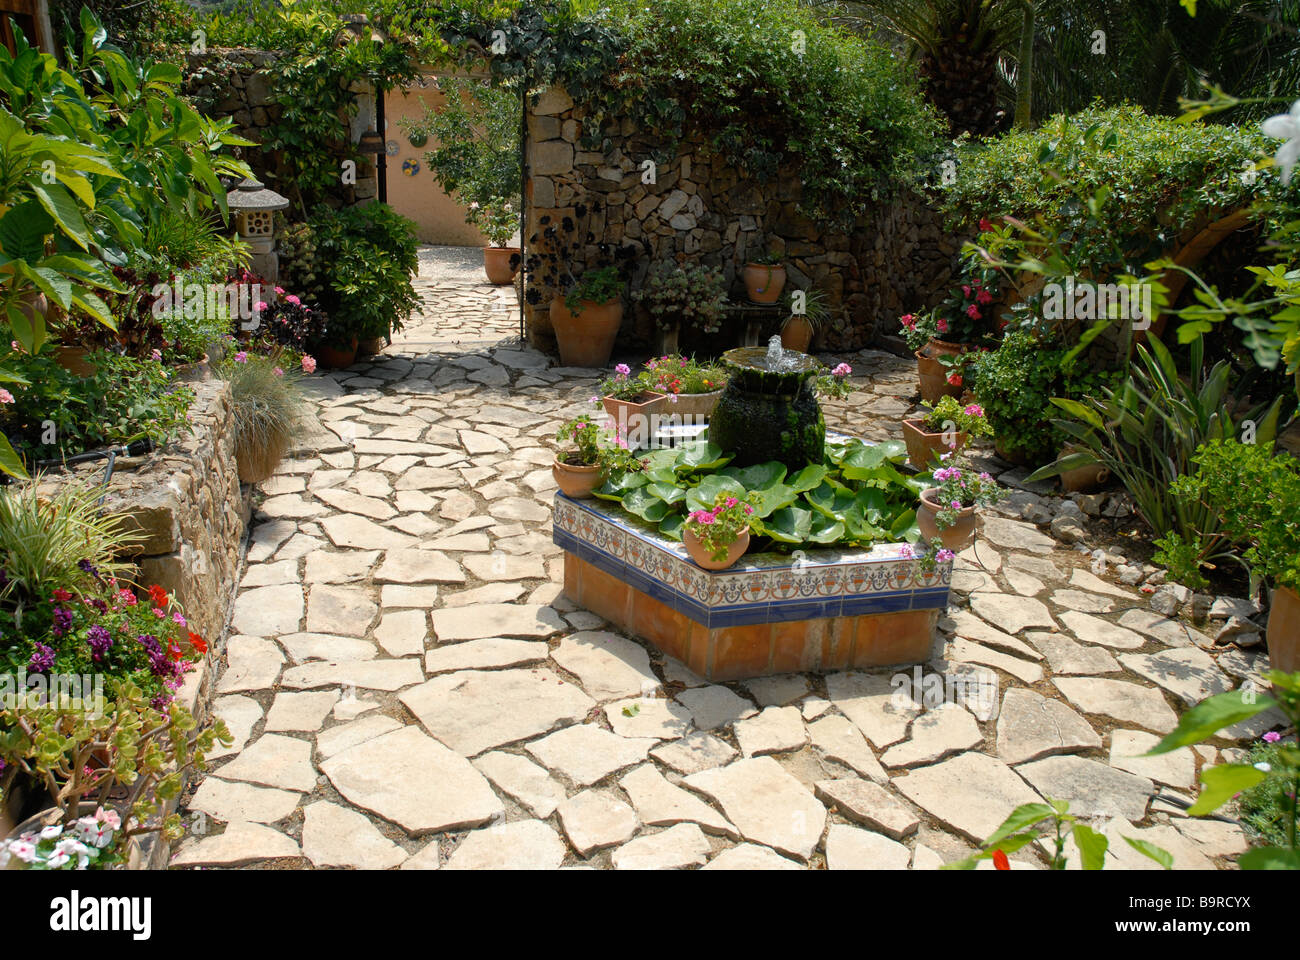 Typical Spanish Walled Courtyard Garden With Pond And Water